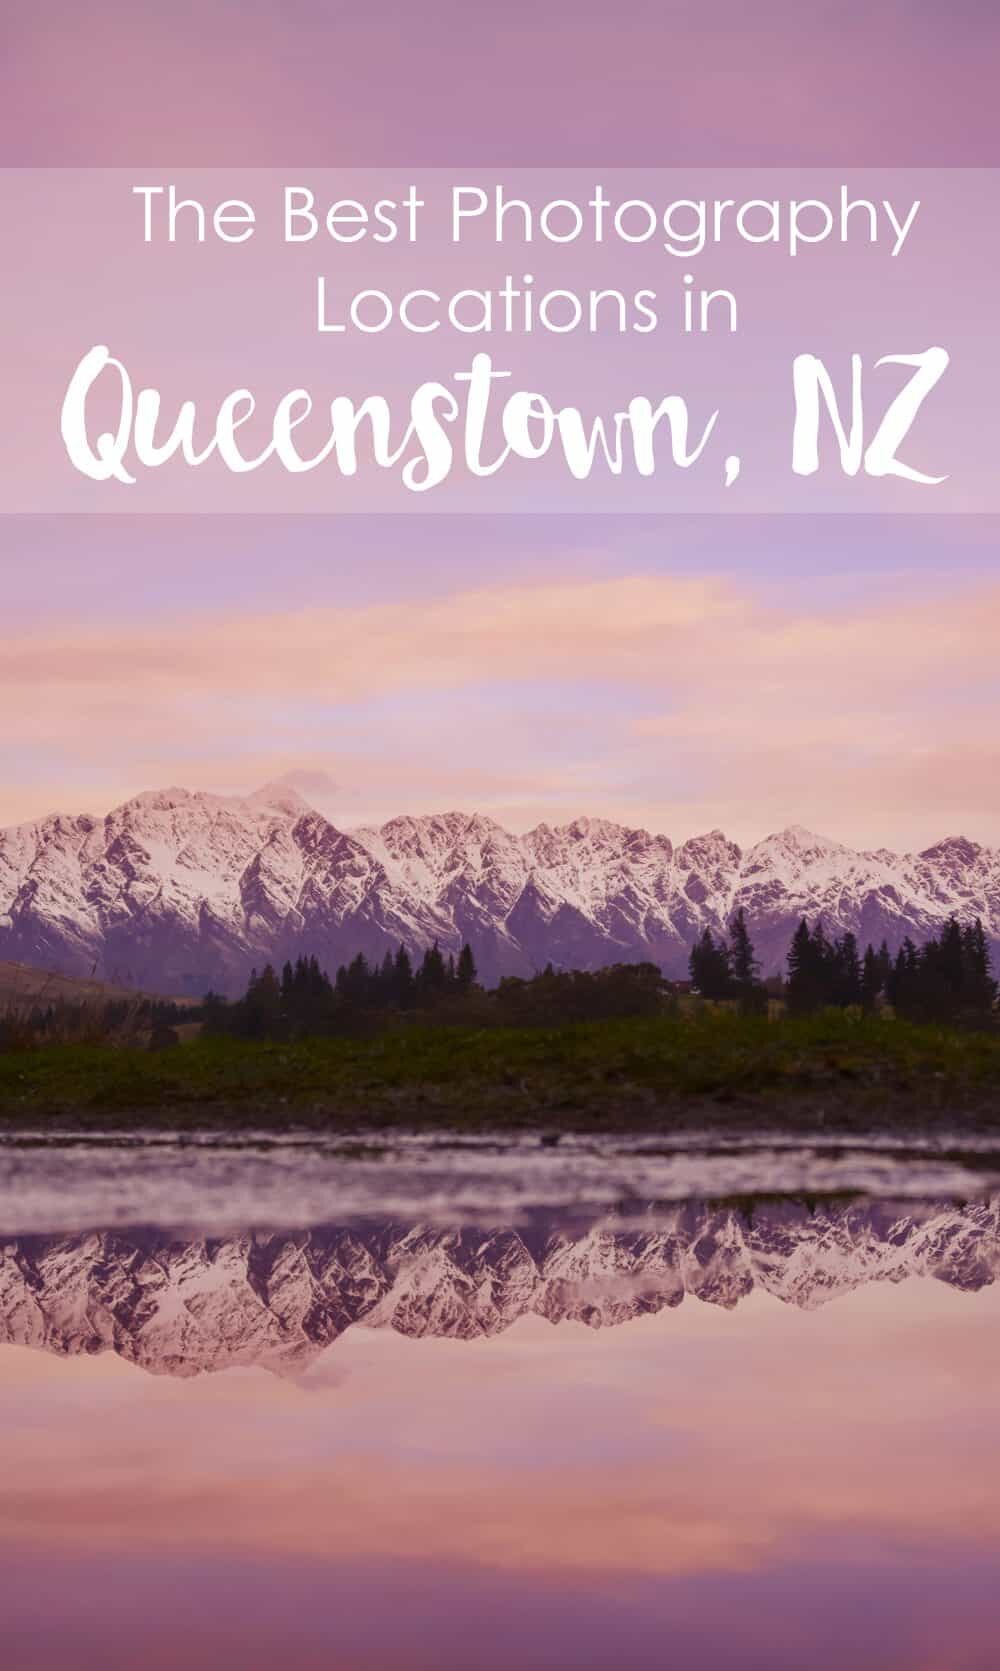 Queenstown Photography Location Guide by The Wandering Lens www.thewanderinglens.com